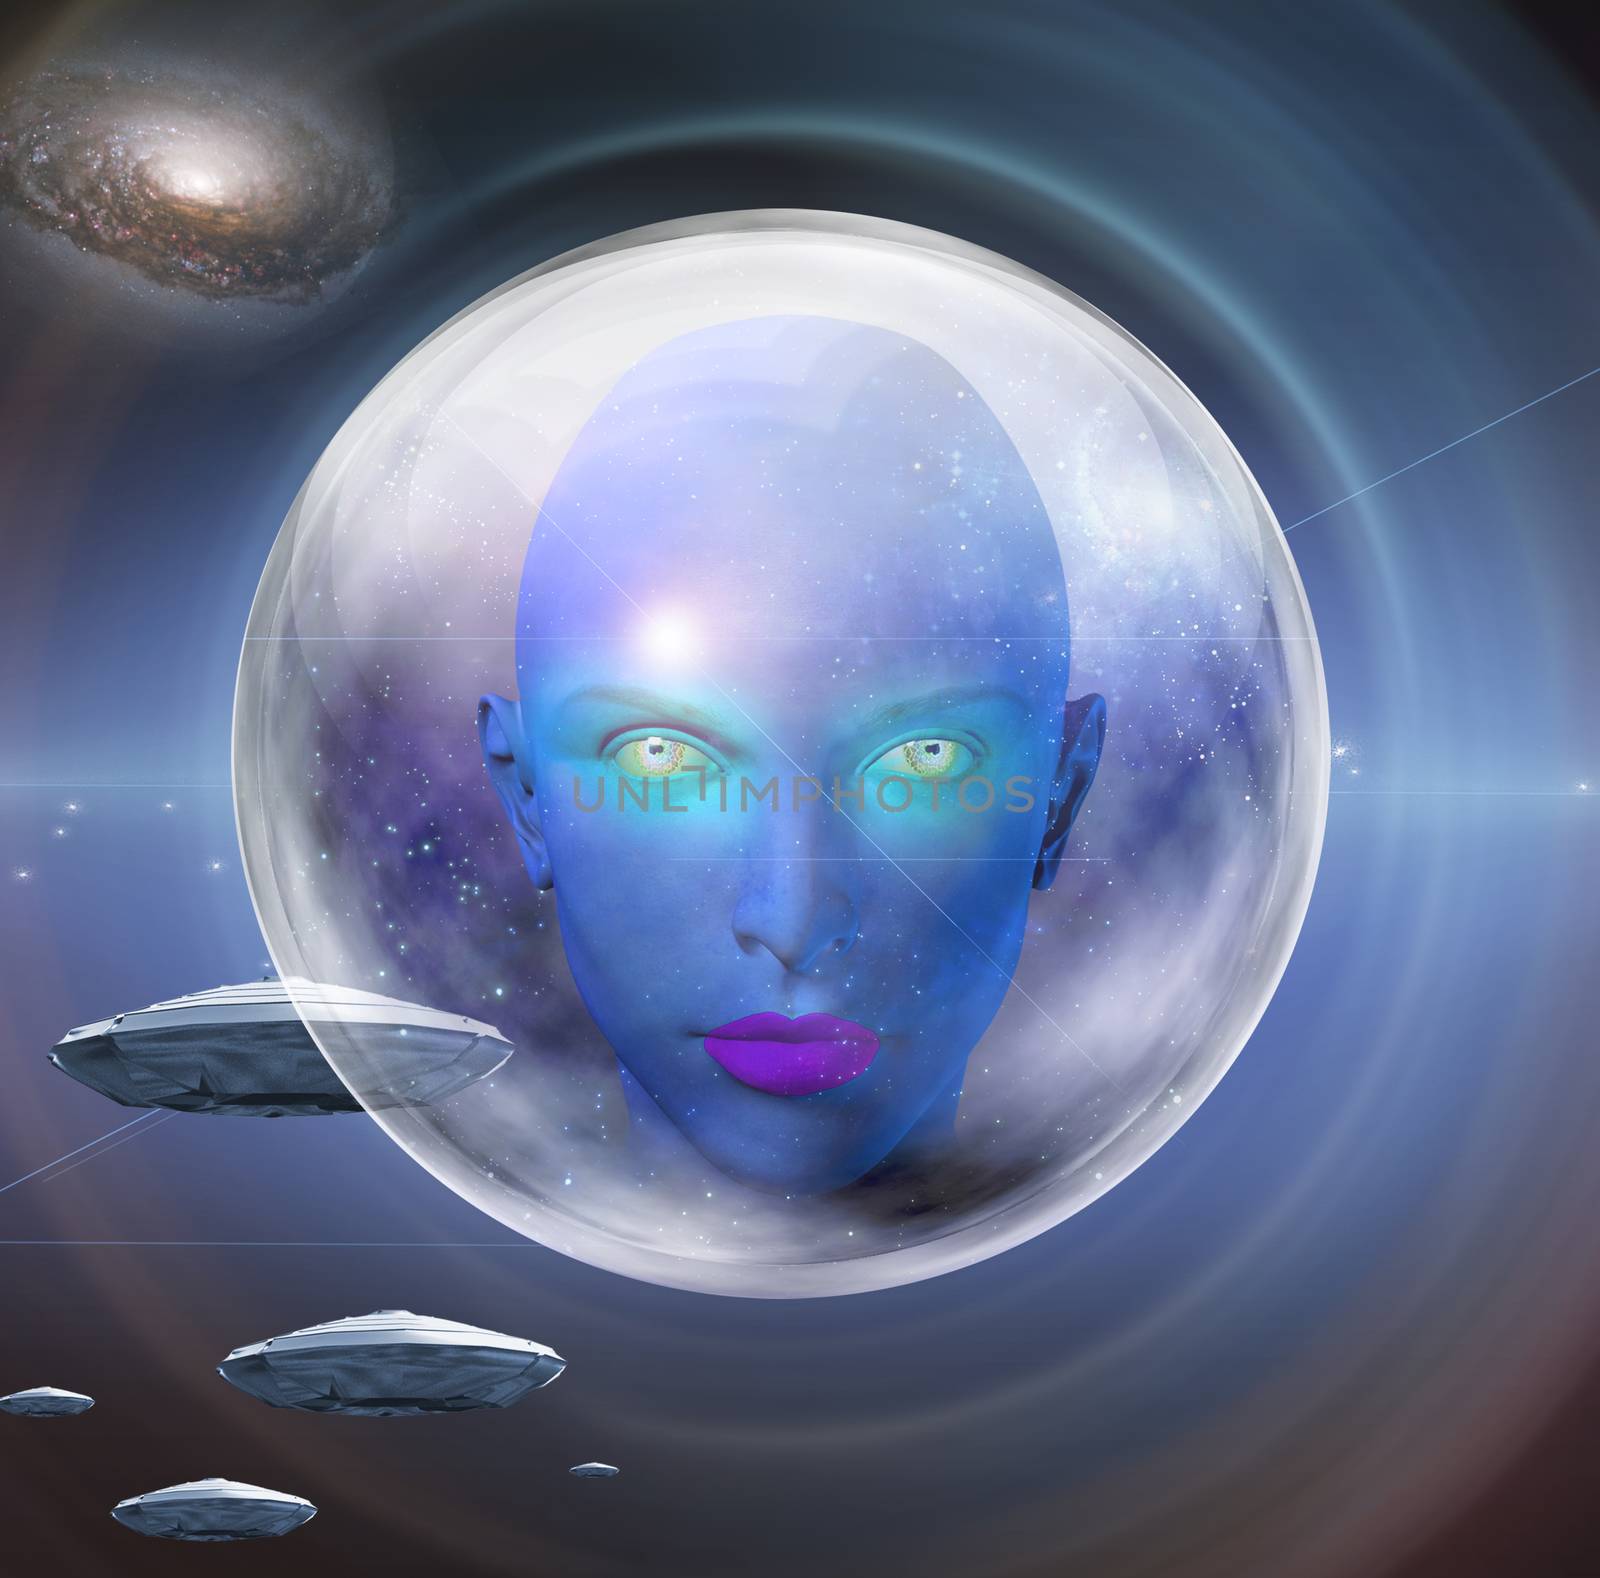 The face of female alien. Flying saucers in deep space on a background.